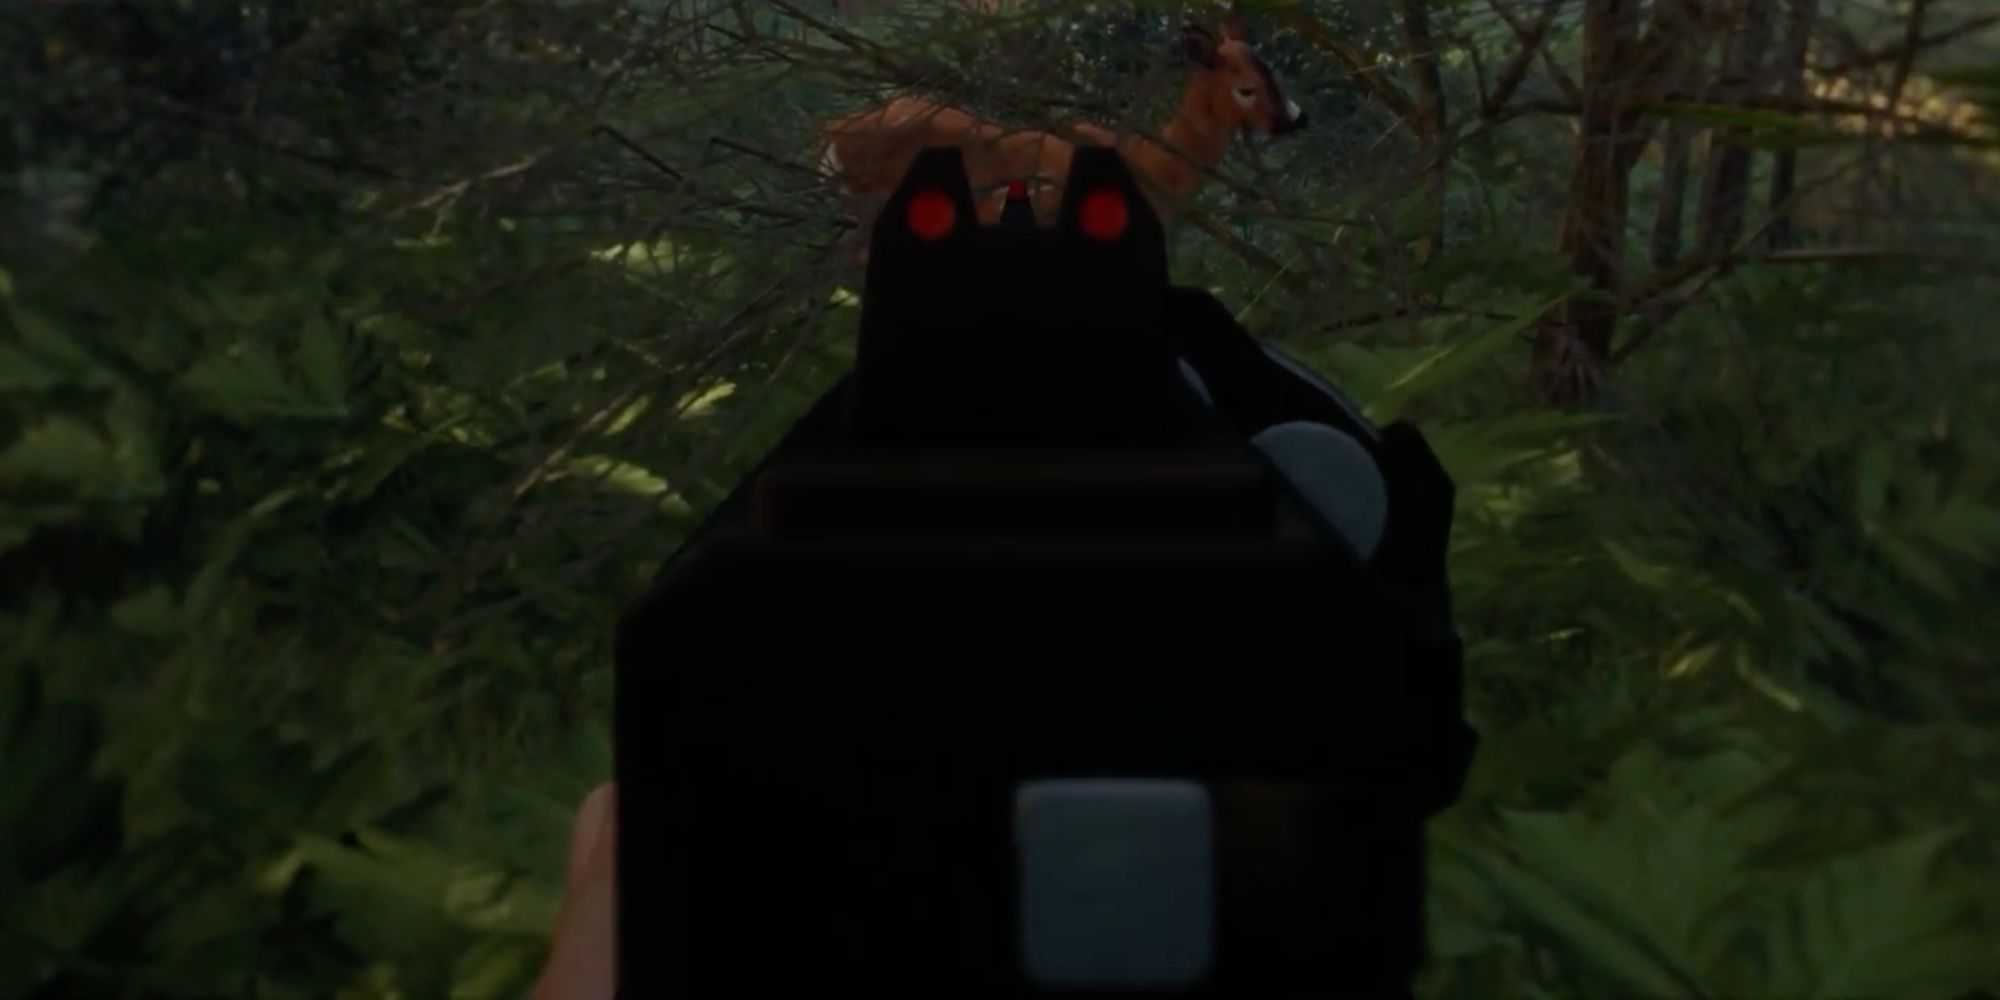 Player shoots an animal up close using a Vasquez Cyclone .45